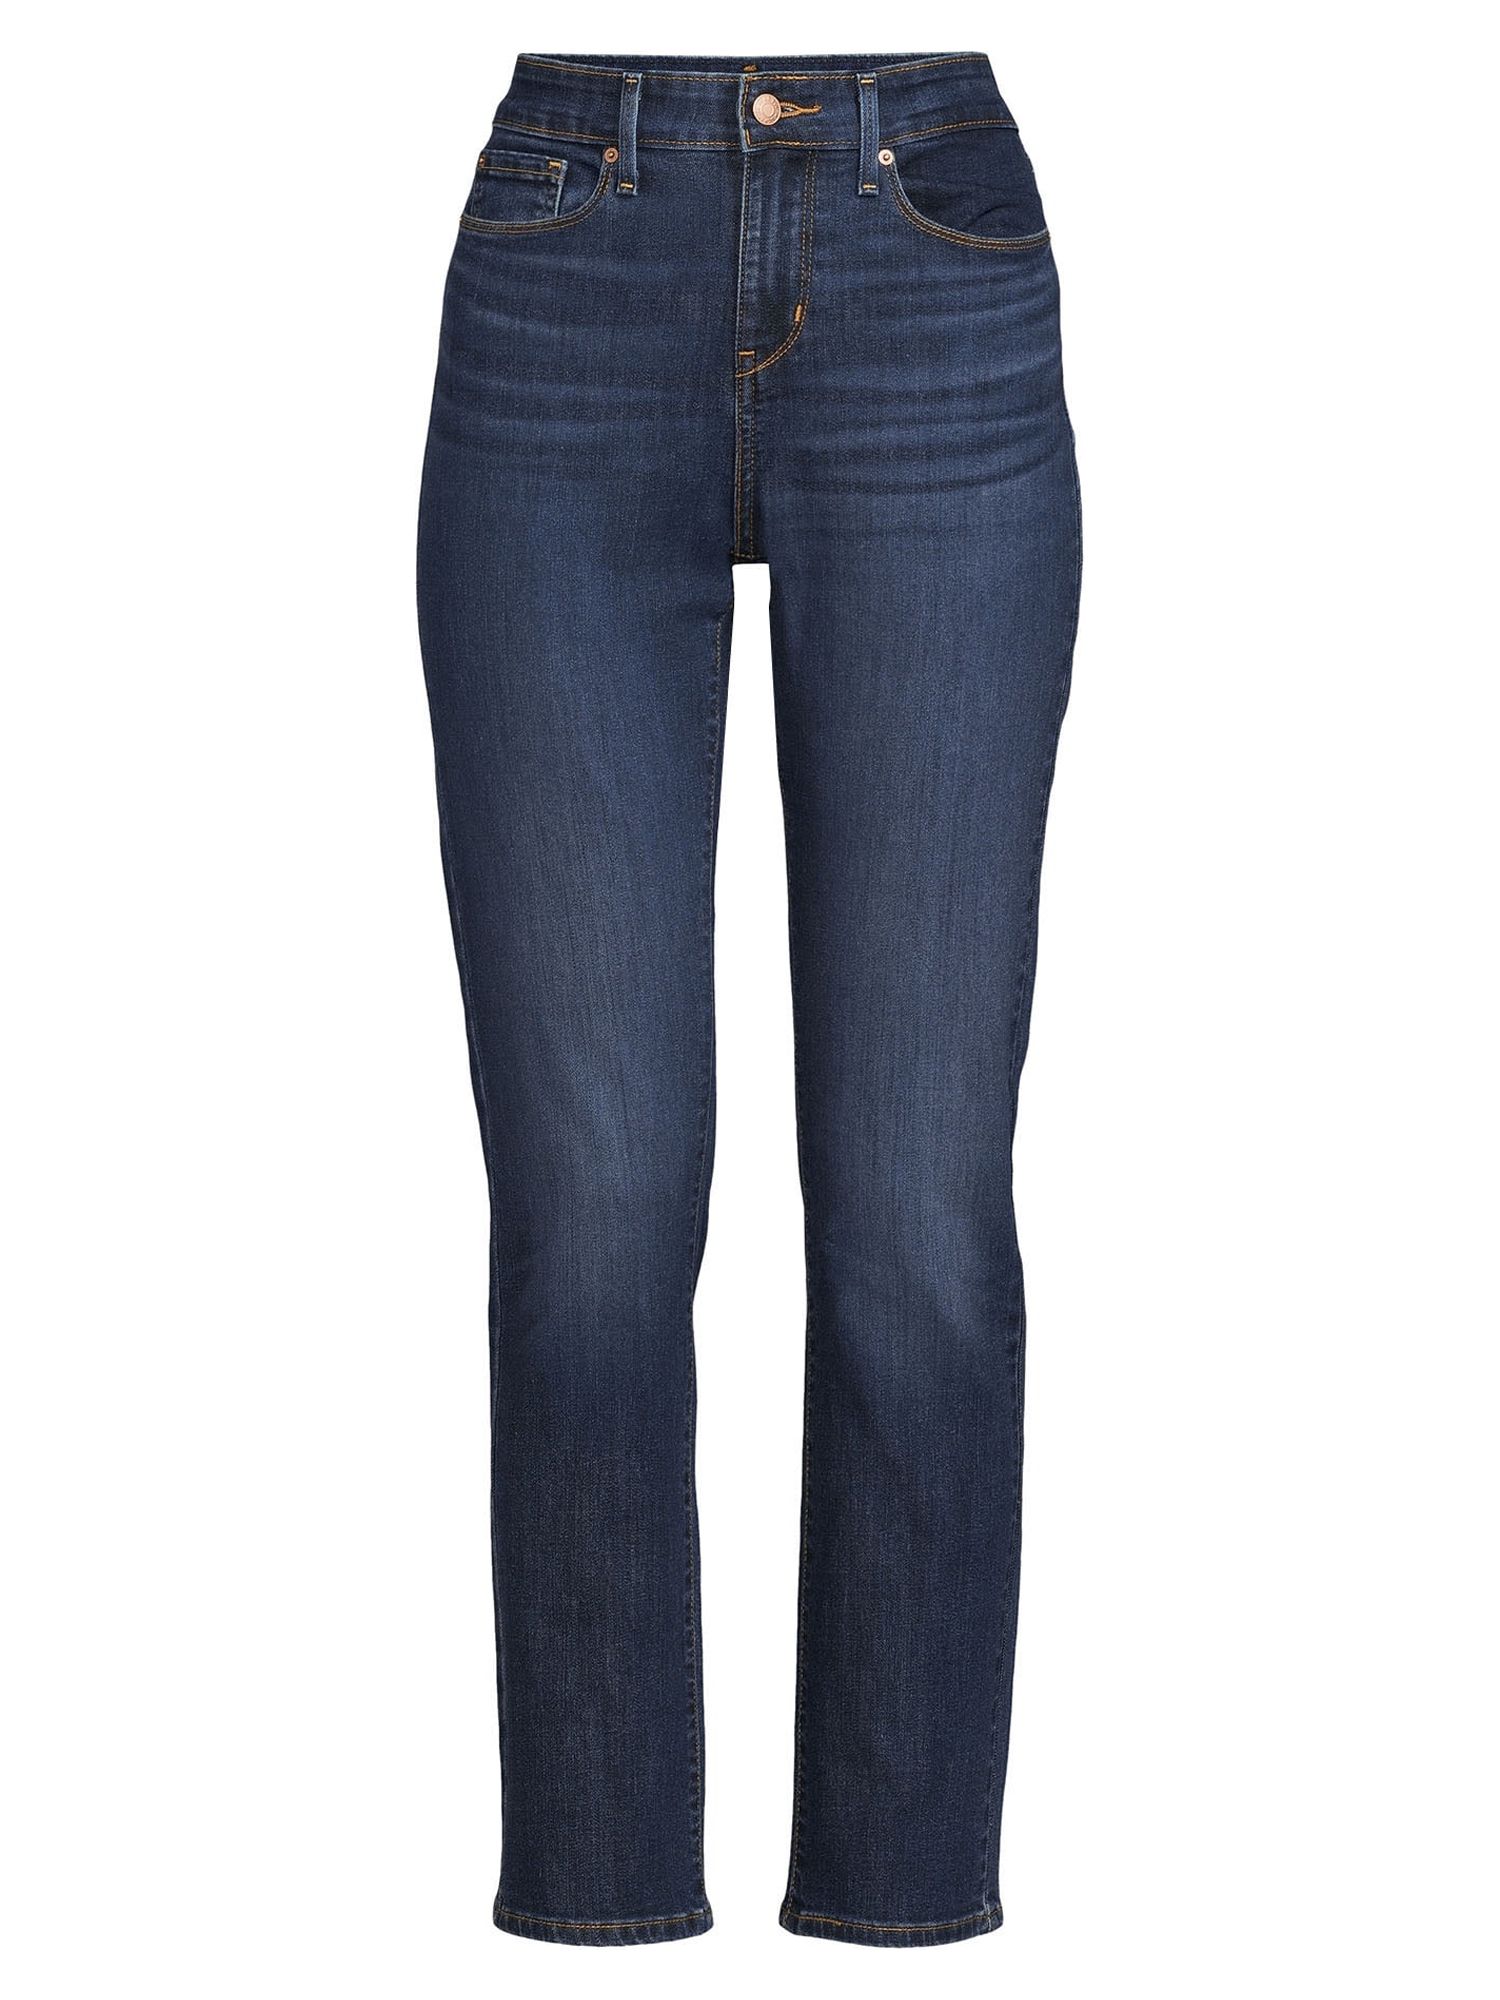 Signature by Levi Strauss & Co. Women's and Women's Plus Size Mid Rise Modern Straight Jeans, Sizes 2-28 - image 5 of 8